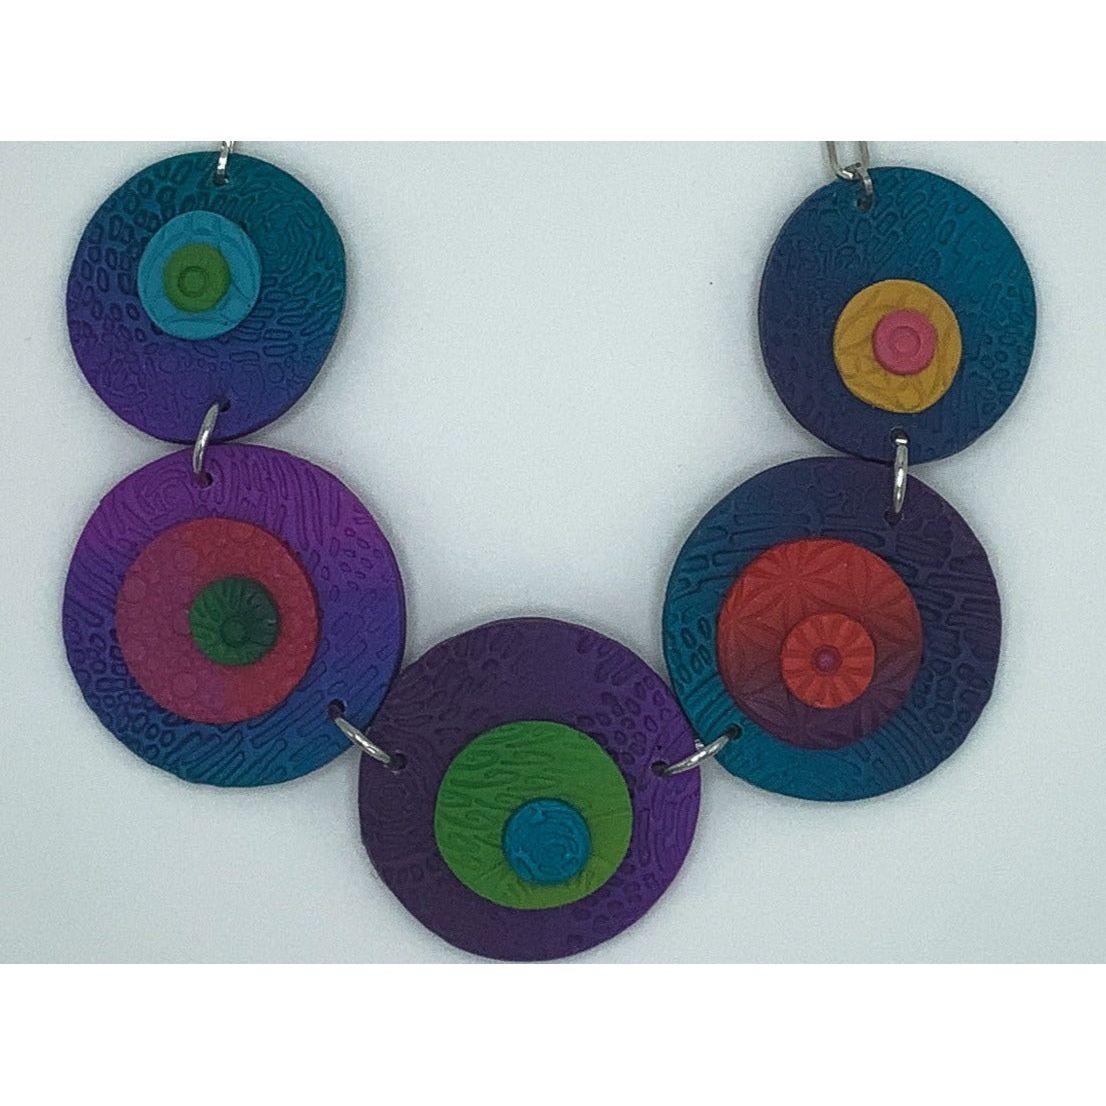 Concentric Circles Necklace - purple ombre center - The Art of Lori Axelrod